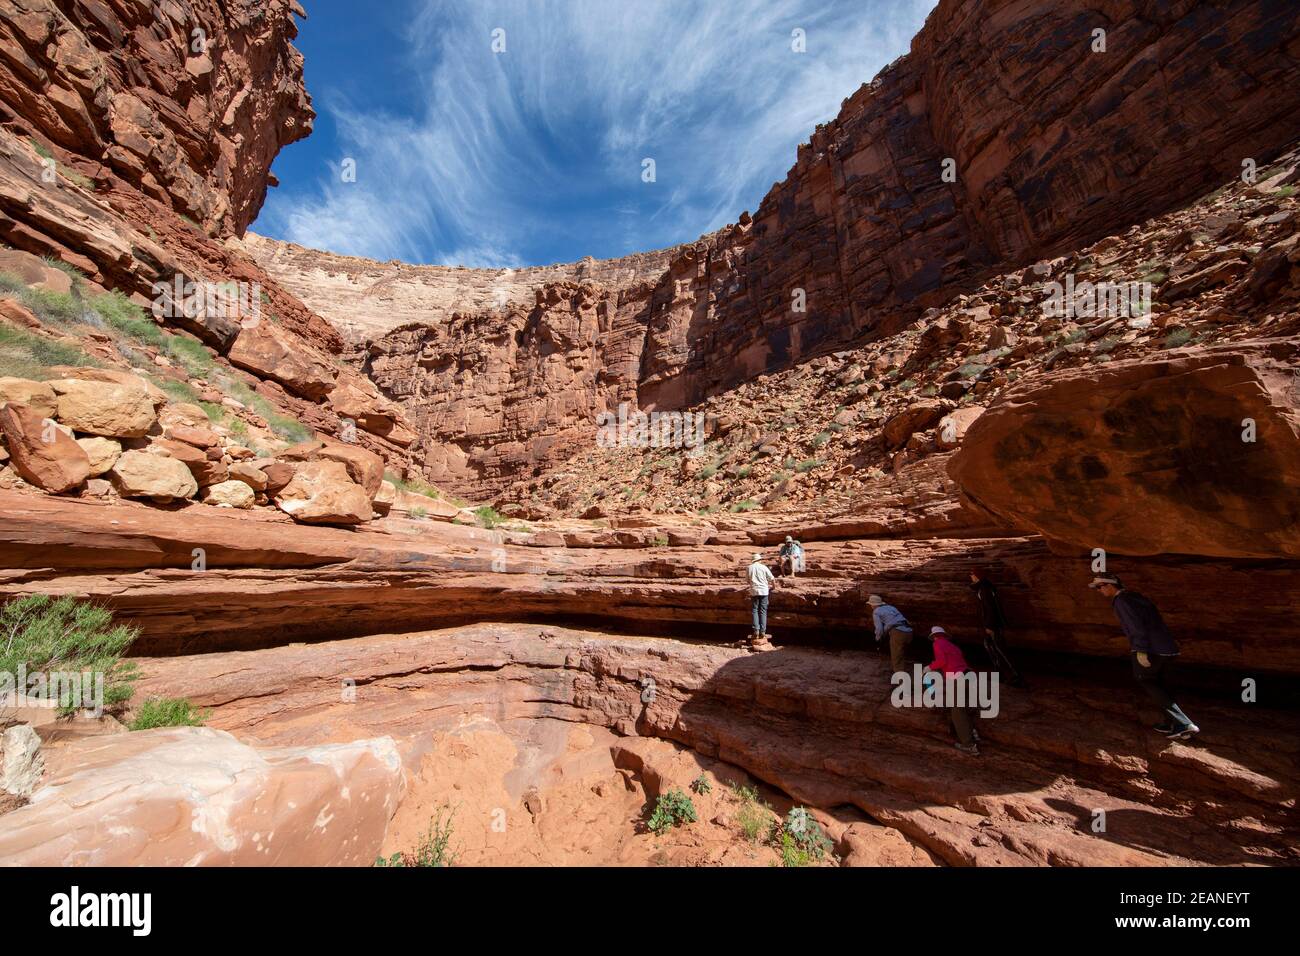 Hikers in Marble Canyon along the Colorado River, Grand Canyon National Park, UNESCO World Heritage Site, Arizona, United States of America Stock Photo